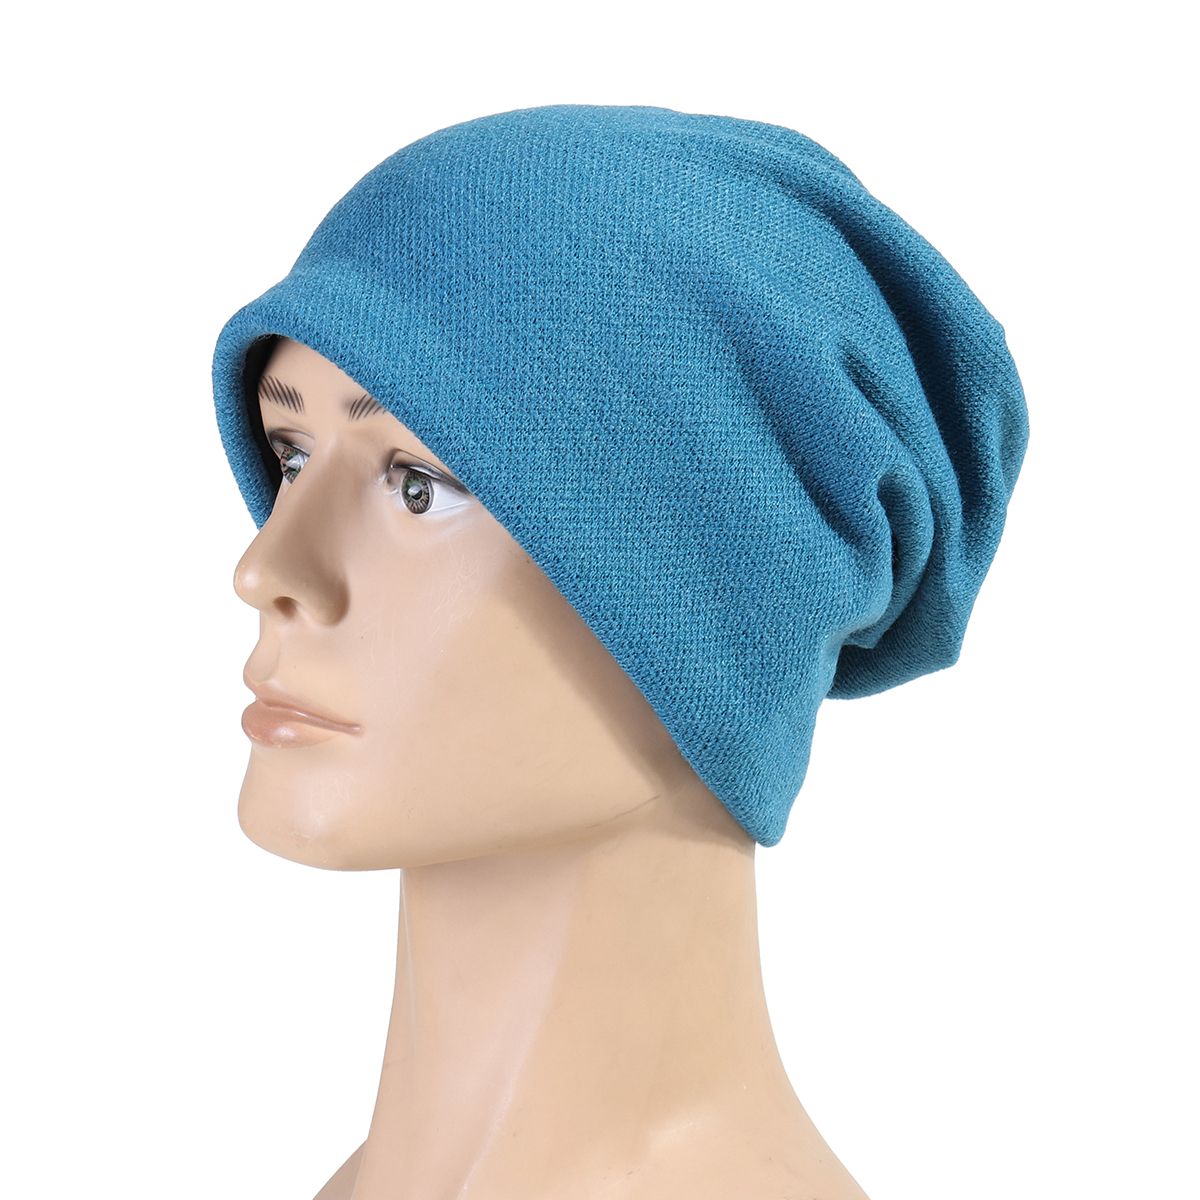 Knitted-Hat-Cotton-Winter-Ski-Running-Hunting-Cycling-Warm-Cap-1628524-7